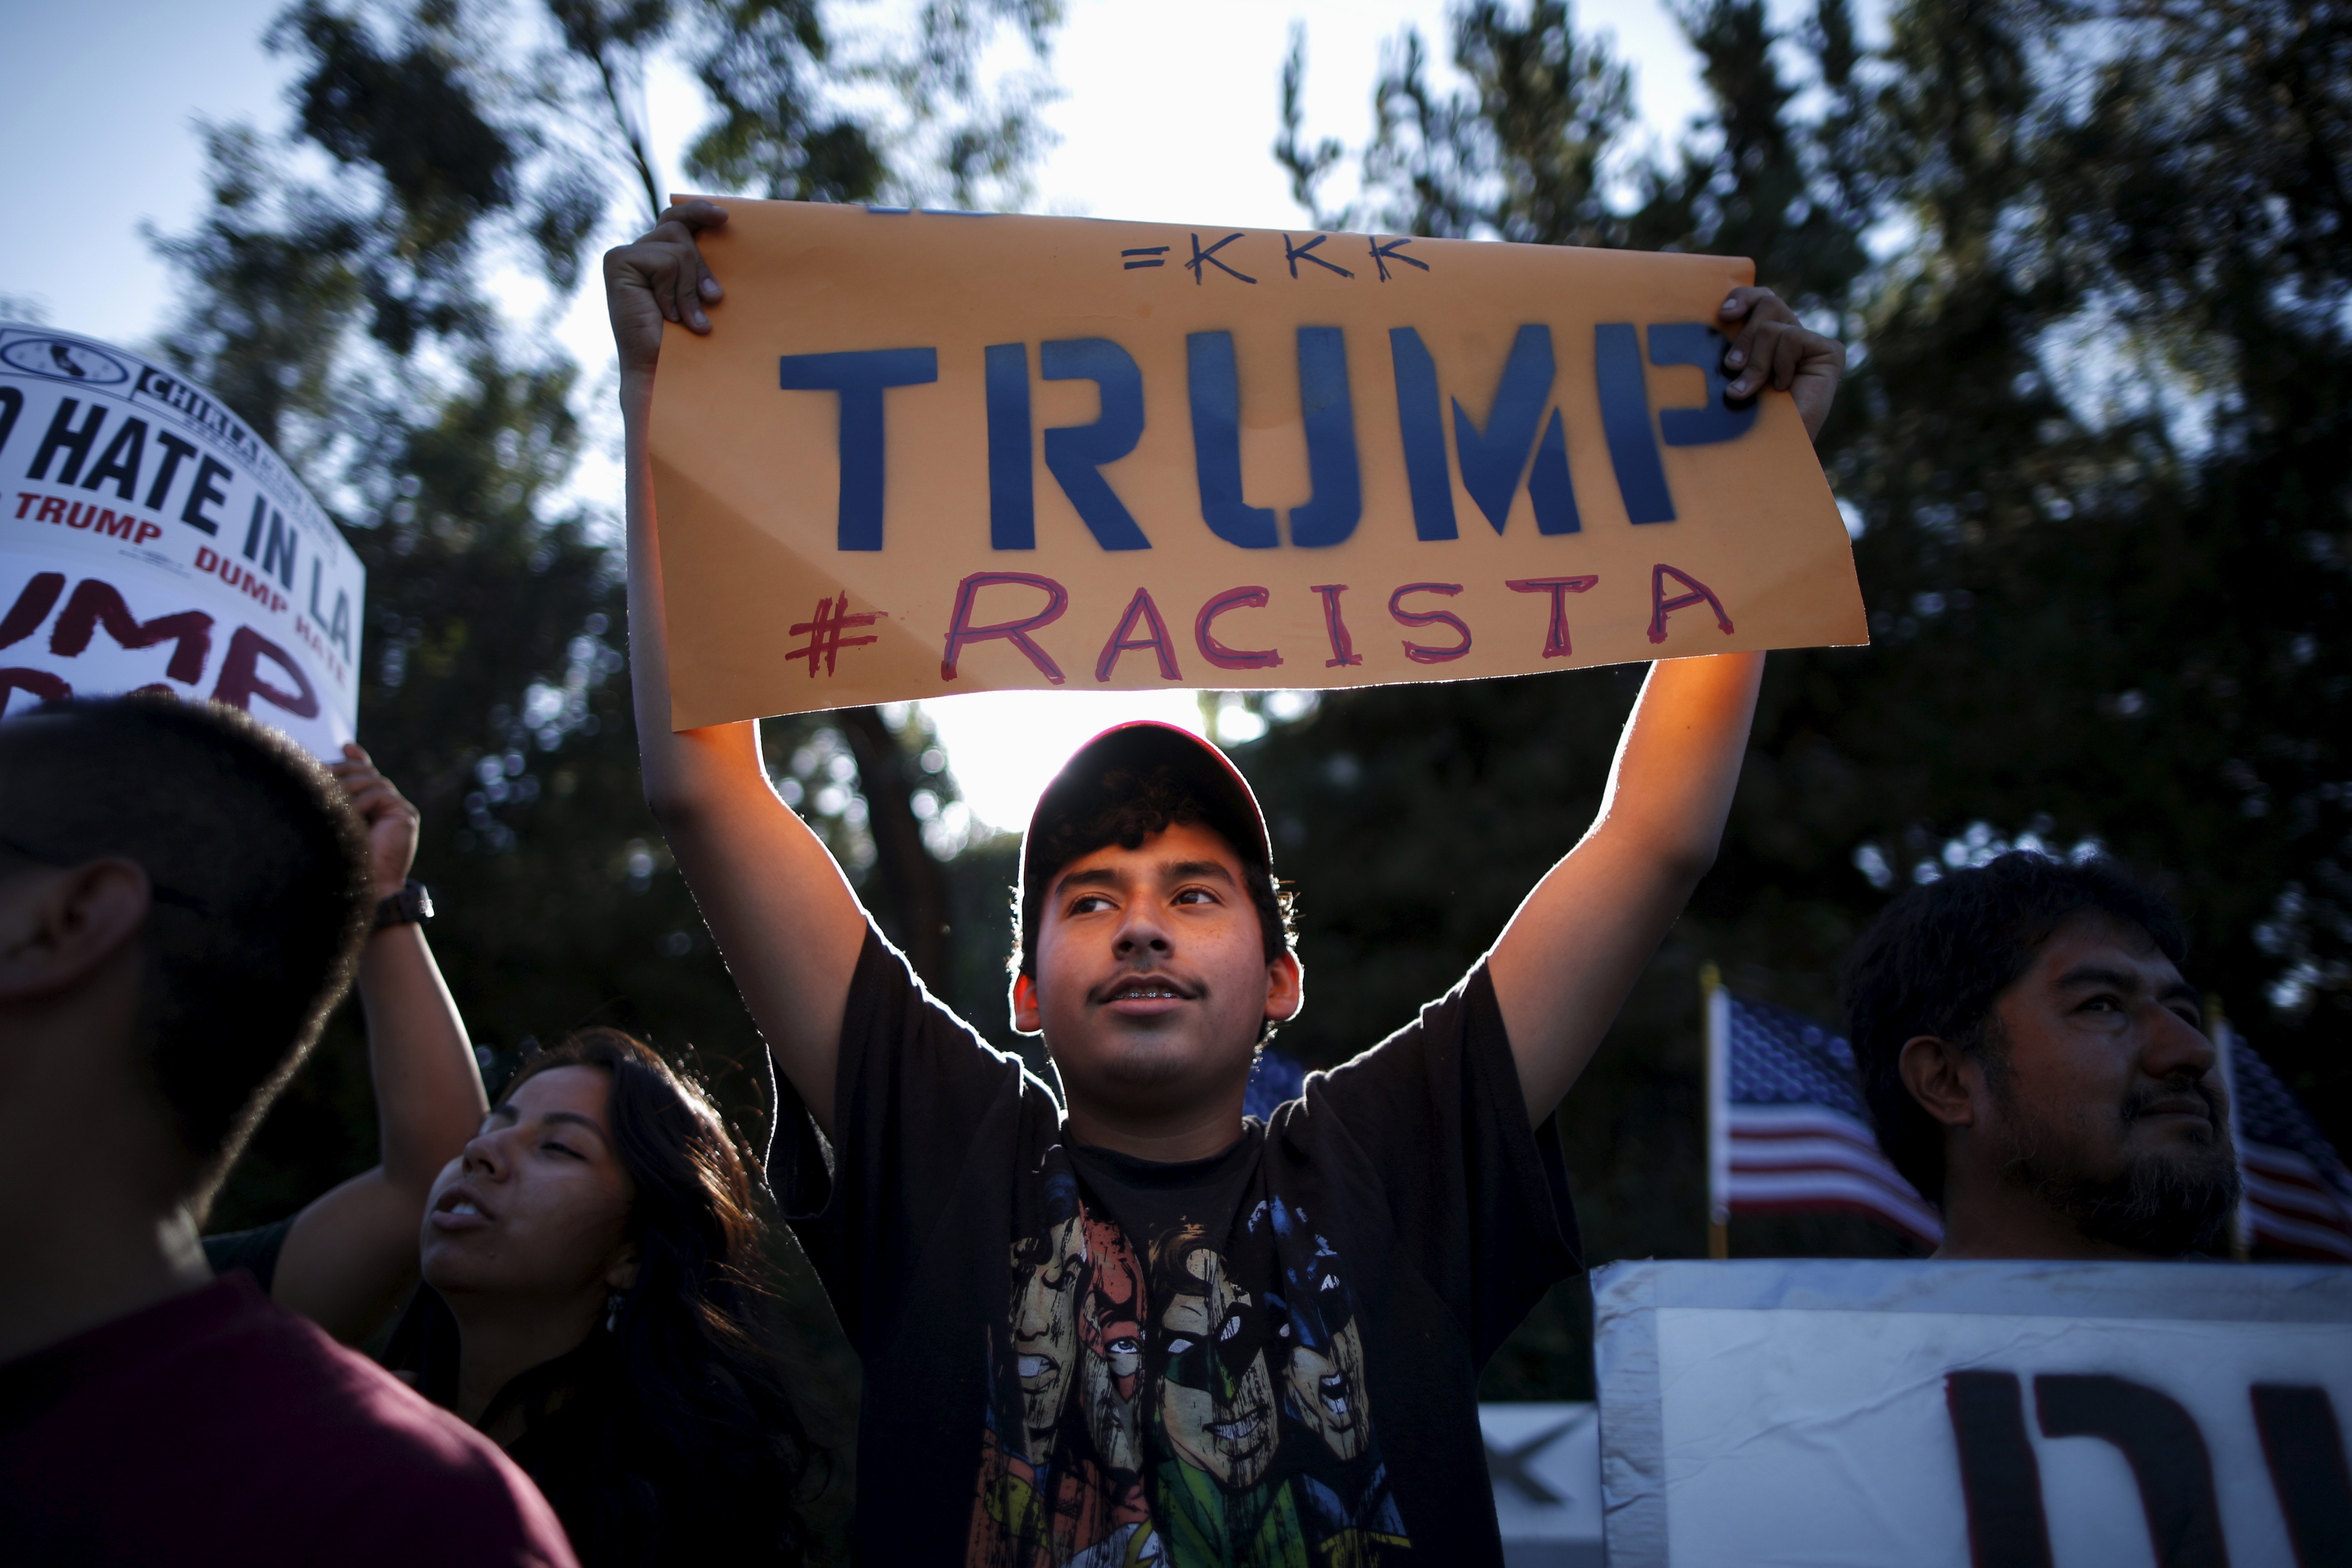 People protest outside the Luxe Hotel, where Republican presidential candidate Donald Trump was expected to speak in Brentwood, Los Angeles, California, United States July 10, 2015. At least 10 businesses have severed deals with billionaire presidential contender Donald Trump after his disparaging comments about Mexican immigrants, following vigorous lobbying by Latinos and others. Trump said that some of his criticism has been distorted. REUTERS/Lucy Nicholson TPX IMAGES OF THE DAY - RTX1JYH8